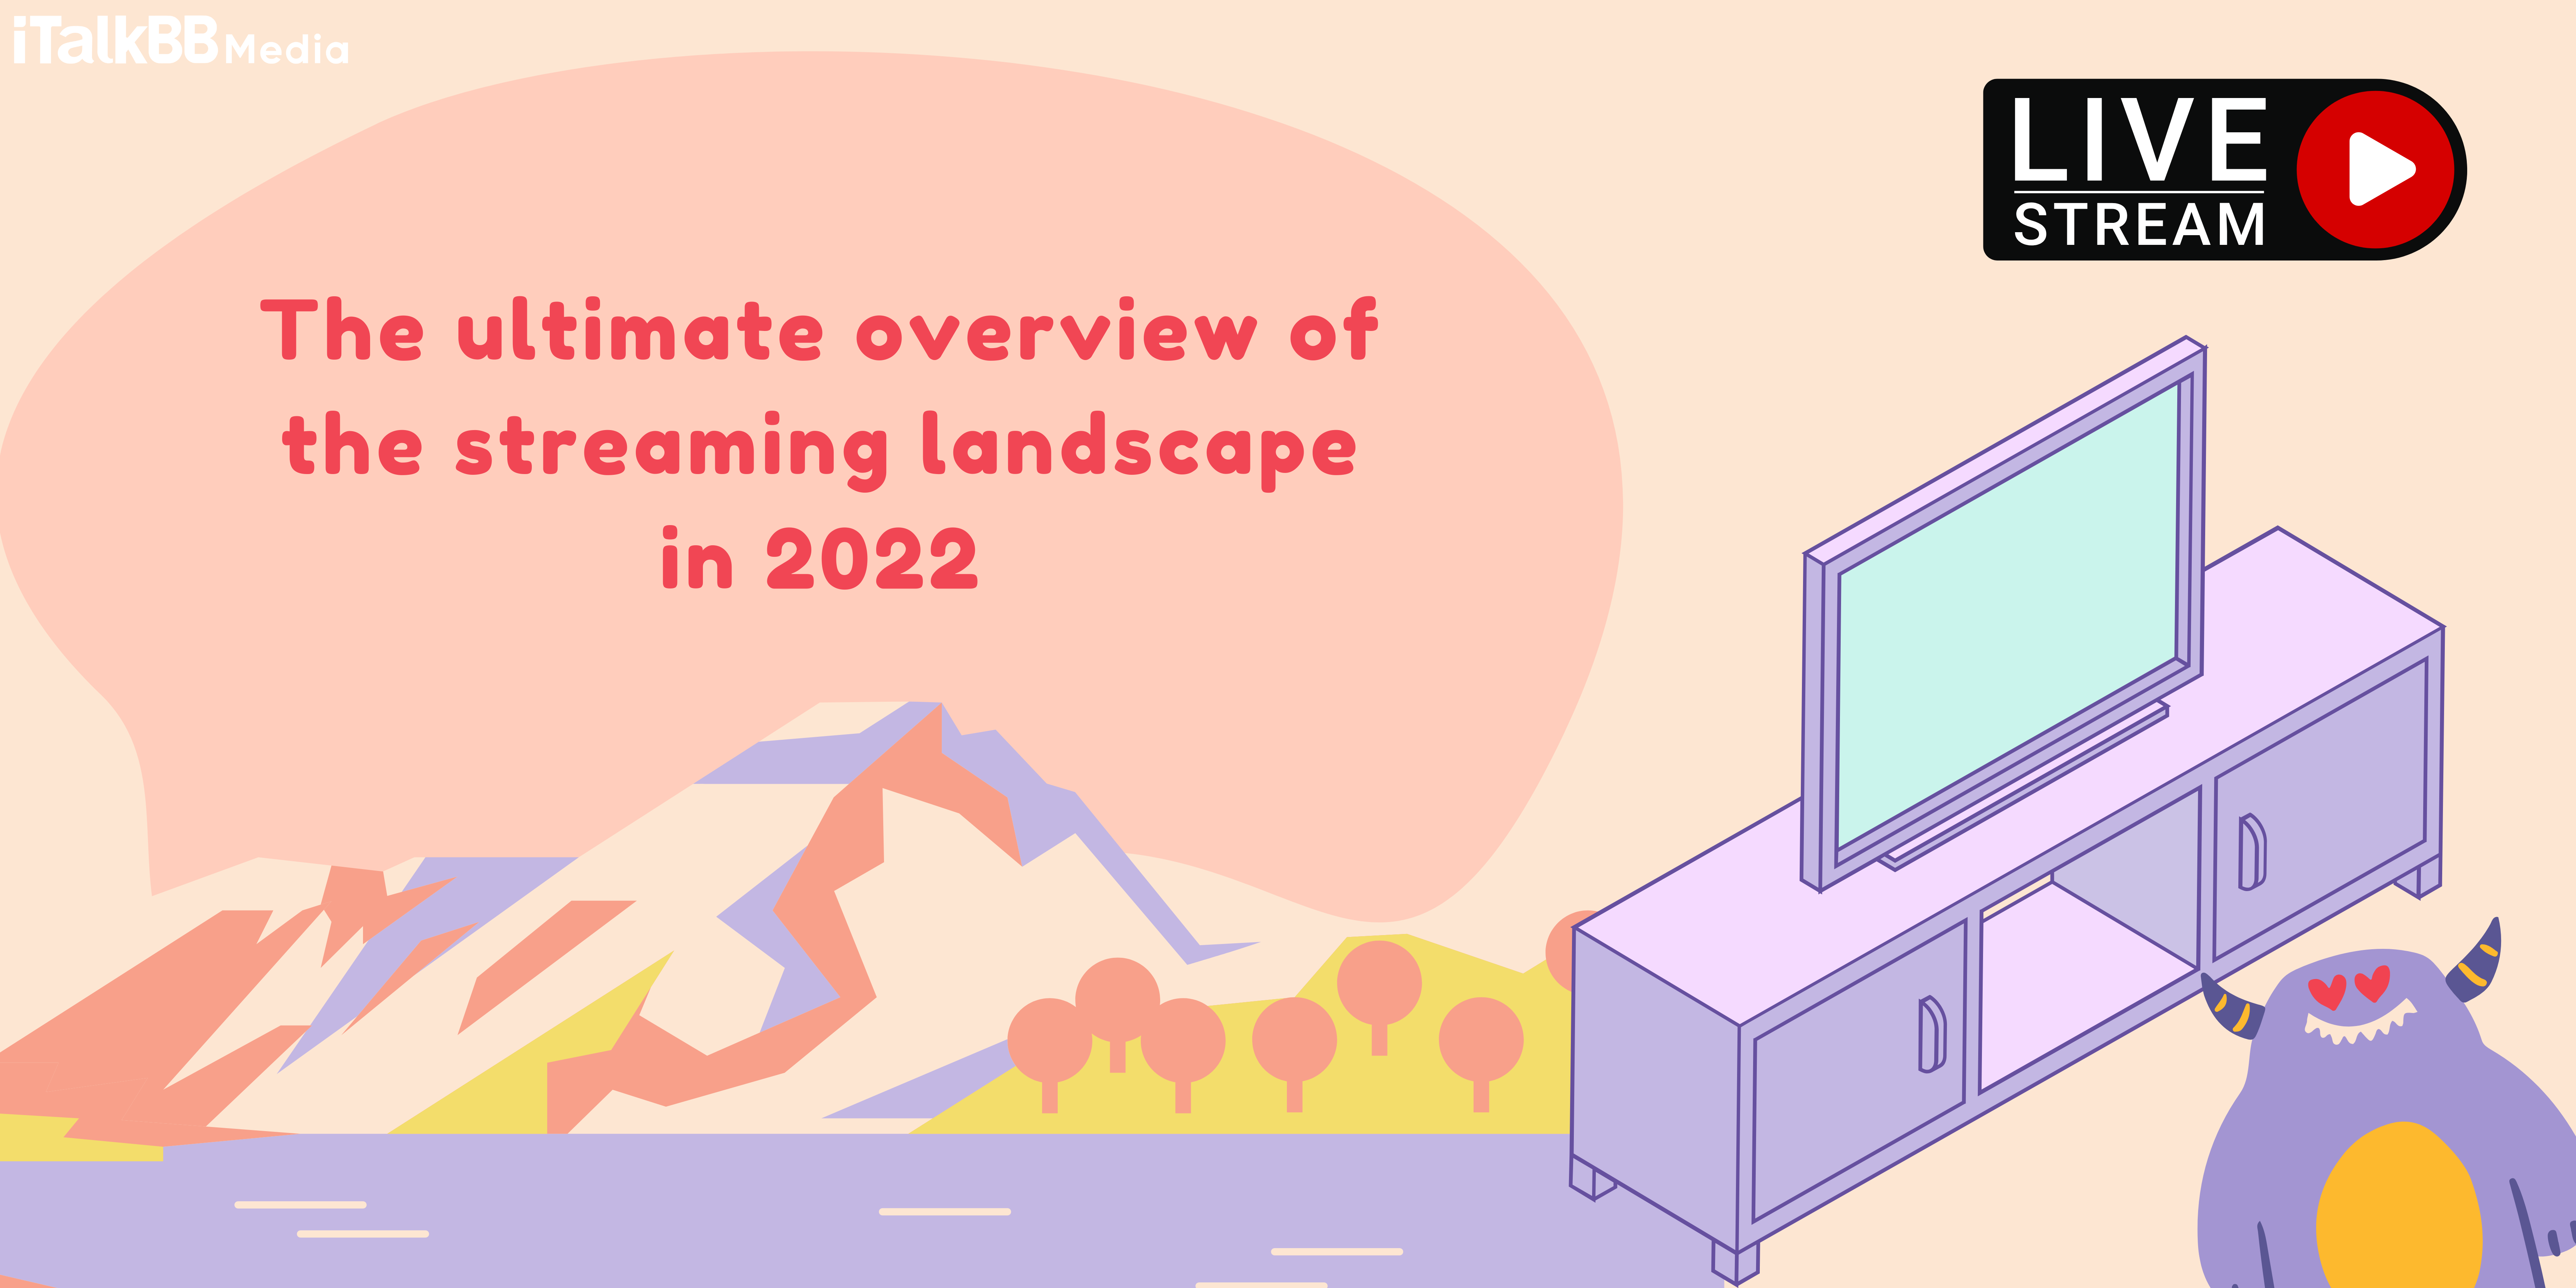 What are OTT, SVOD, AVOD, and TVOD? The ultimate overview of the streaming landscape in 2022